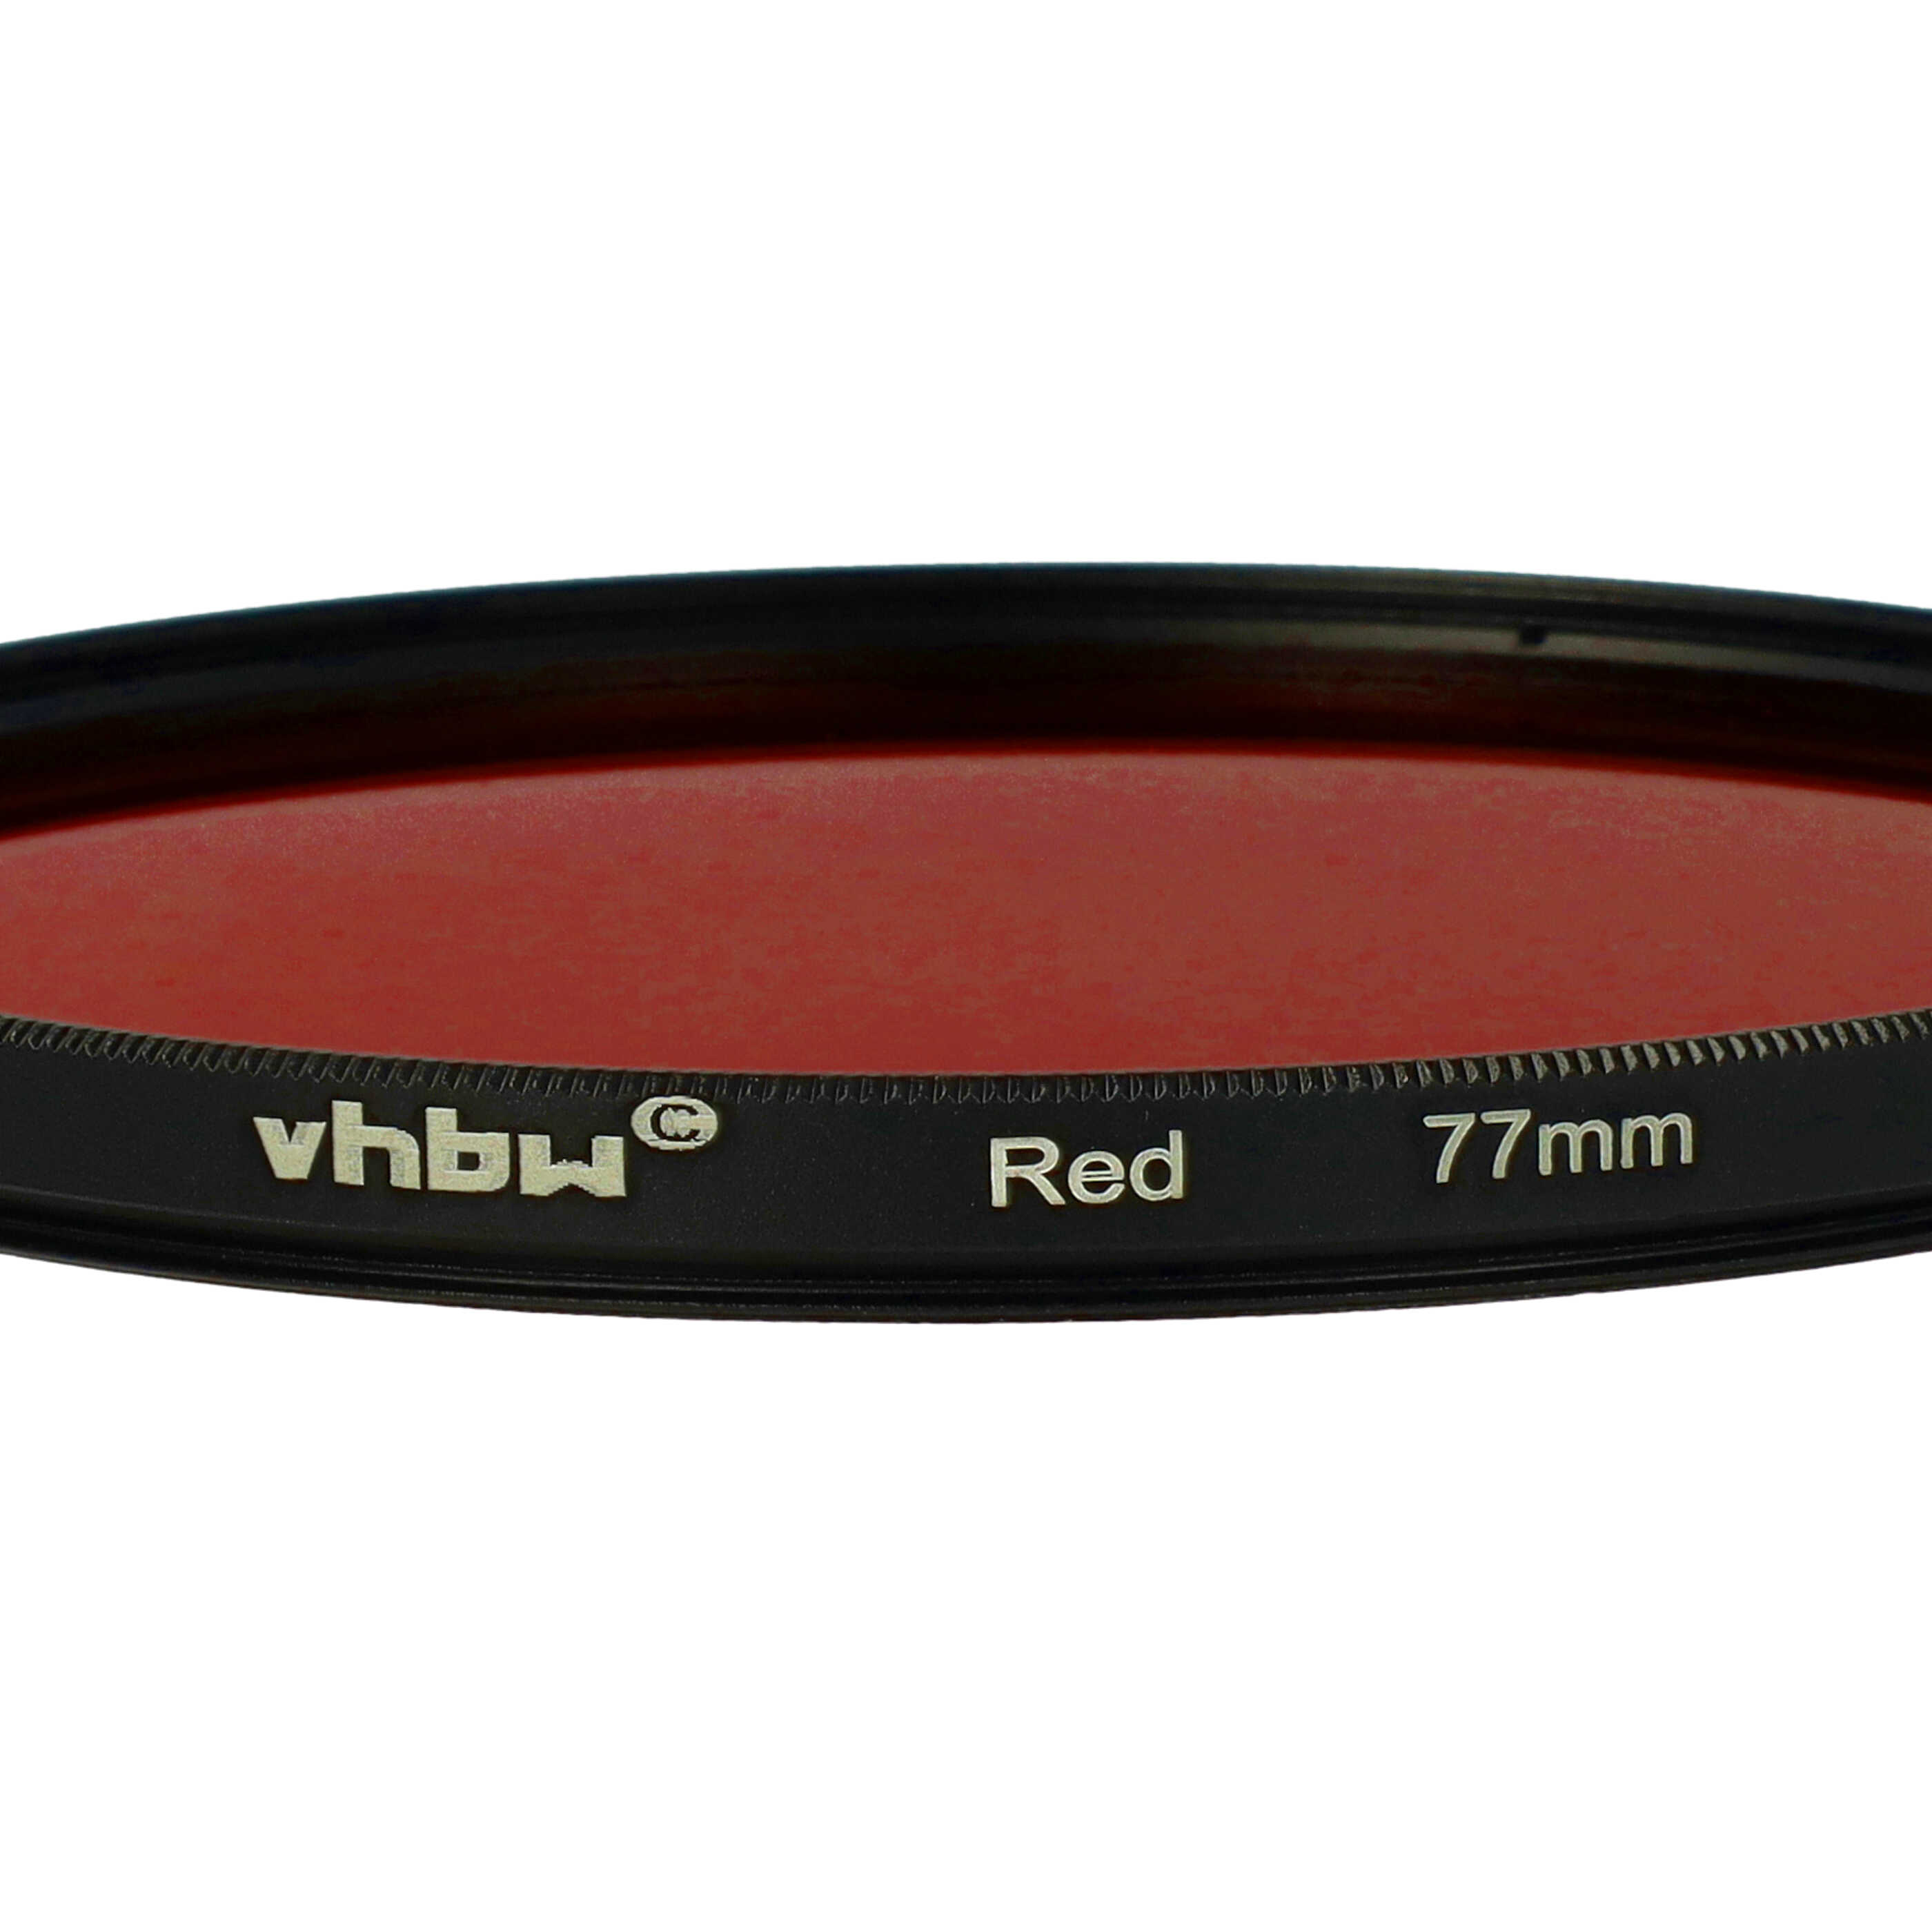 Coloured Filter, Red suitable for Camera Lenses with 77 mm Filter Thread - Red Filter